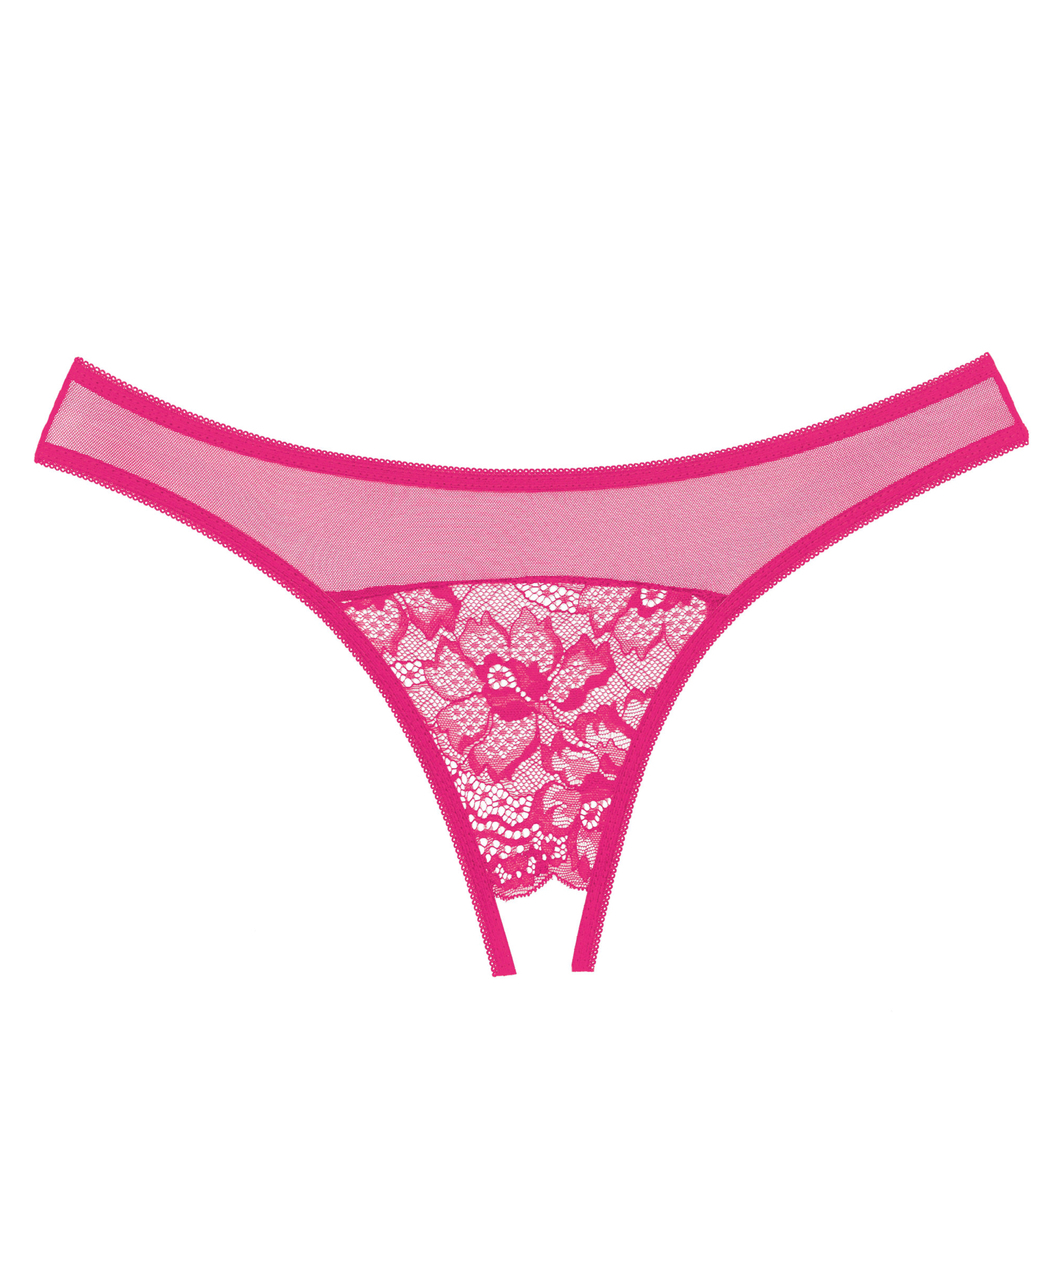 Allure Lingerie Just A Rumor pink crotchless panties